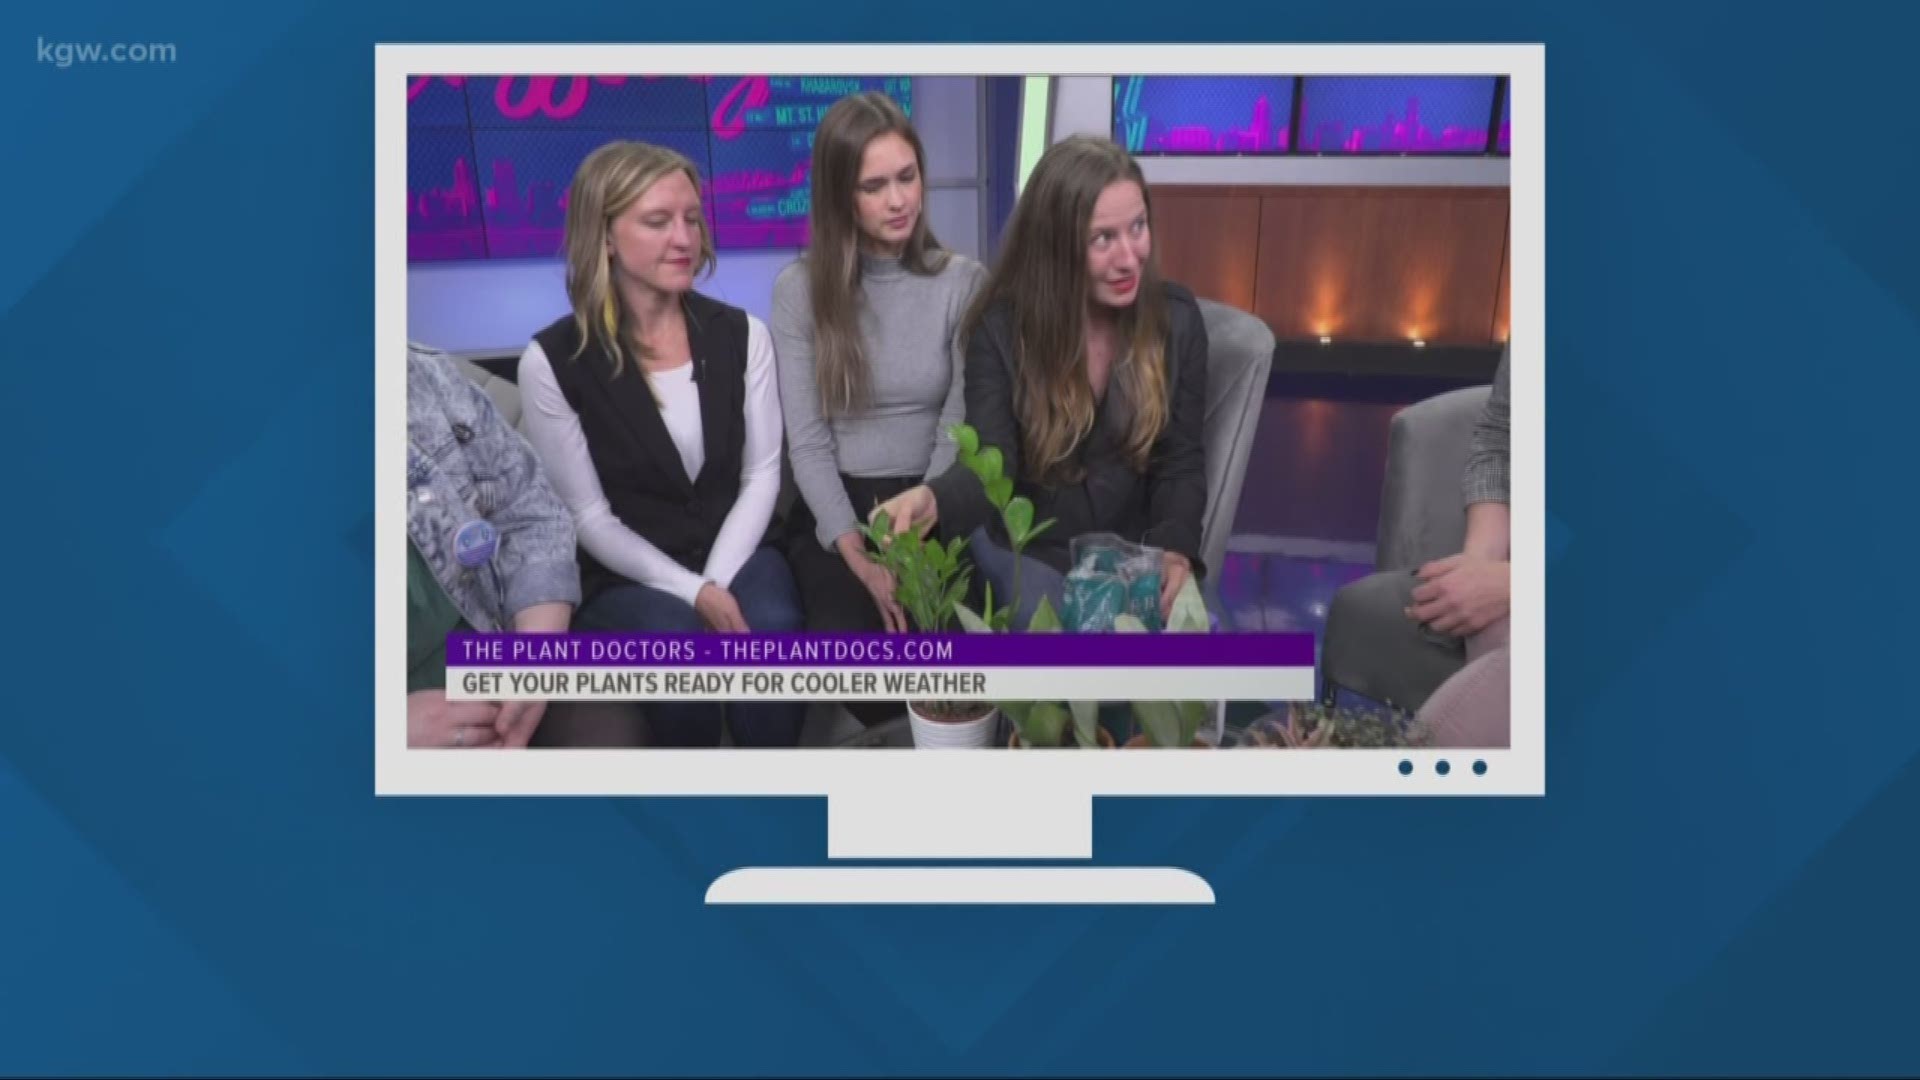 Need some help with this week's #AdultingChallenge? The Plant Doctors revealed one of their biggest plant care secrets during the commercial break.
theplantdocs.com